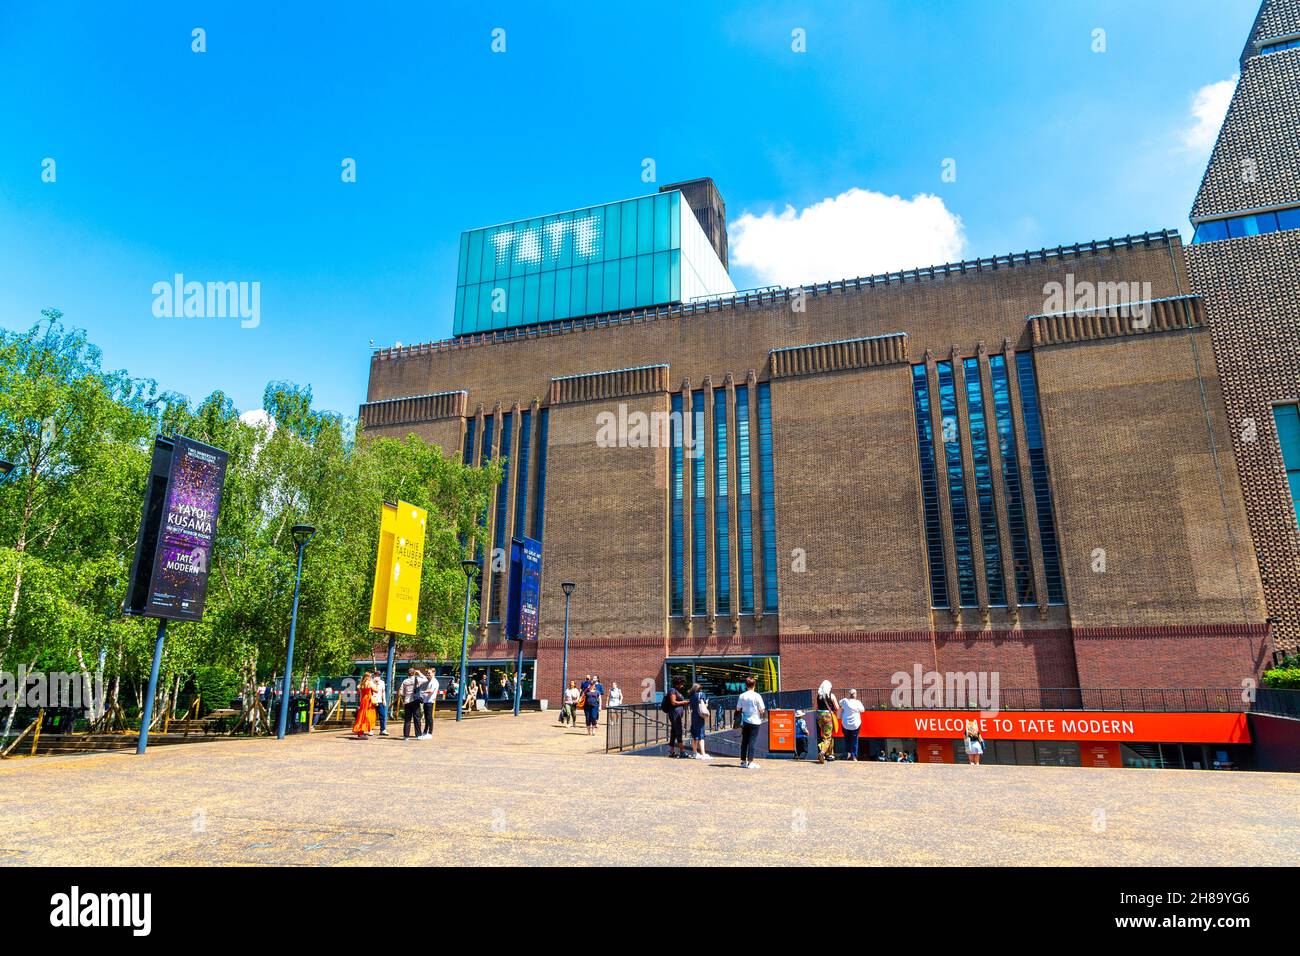 Exterior of the Tate Modern museum inside a former power station, Bankside, London, UK Stock Photo